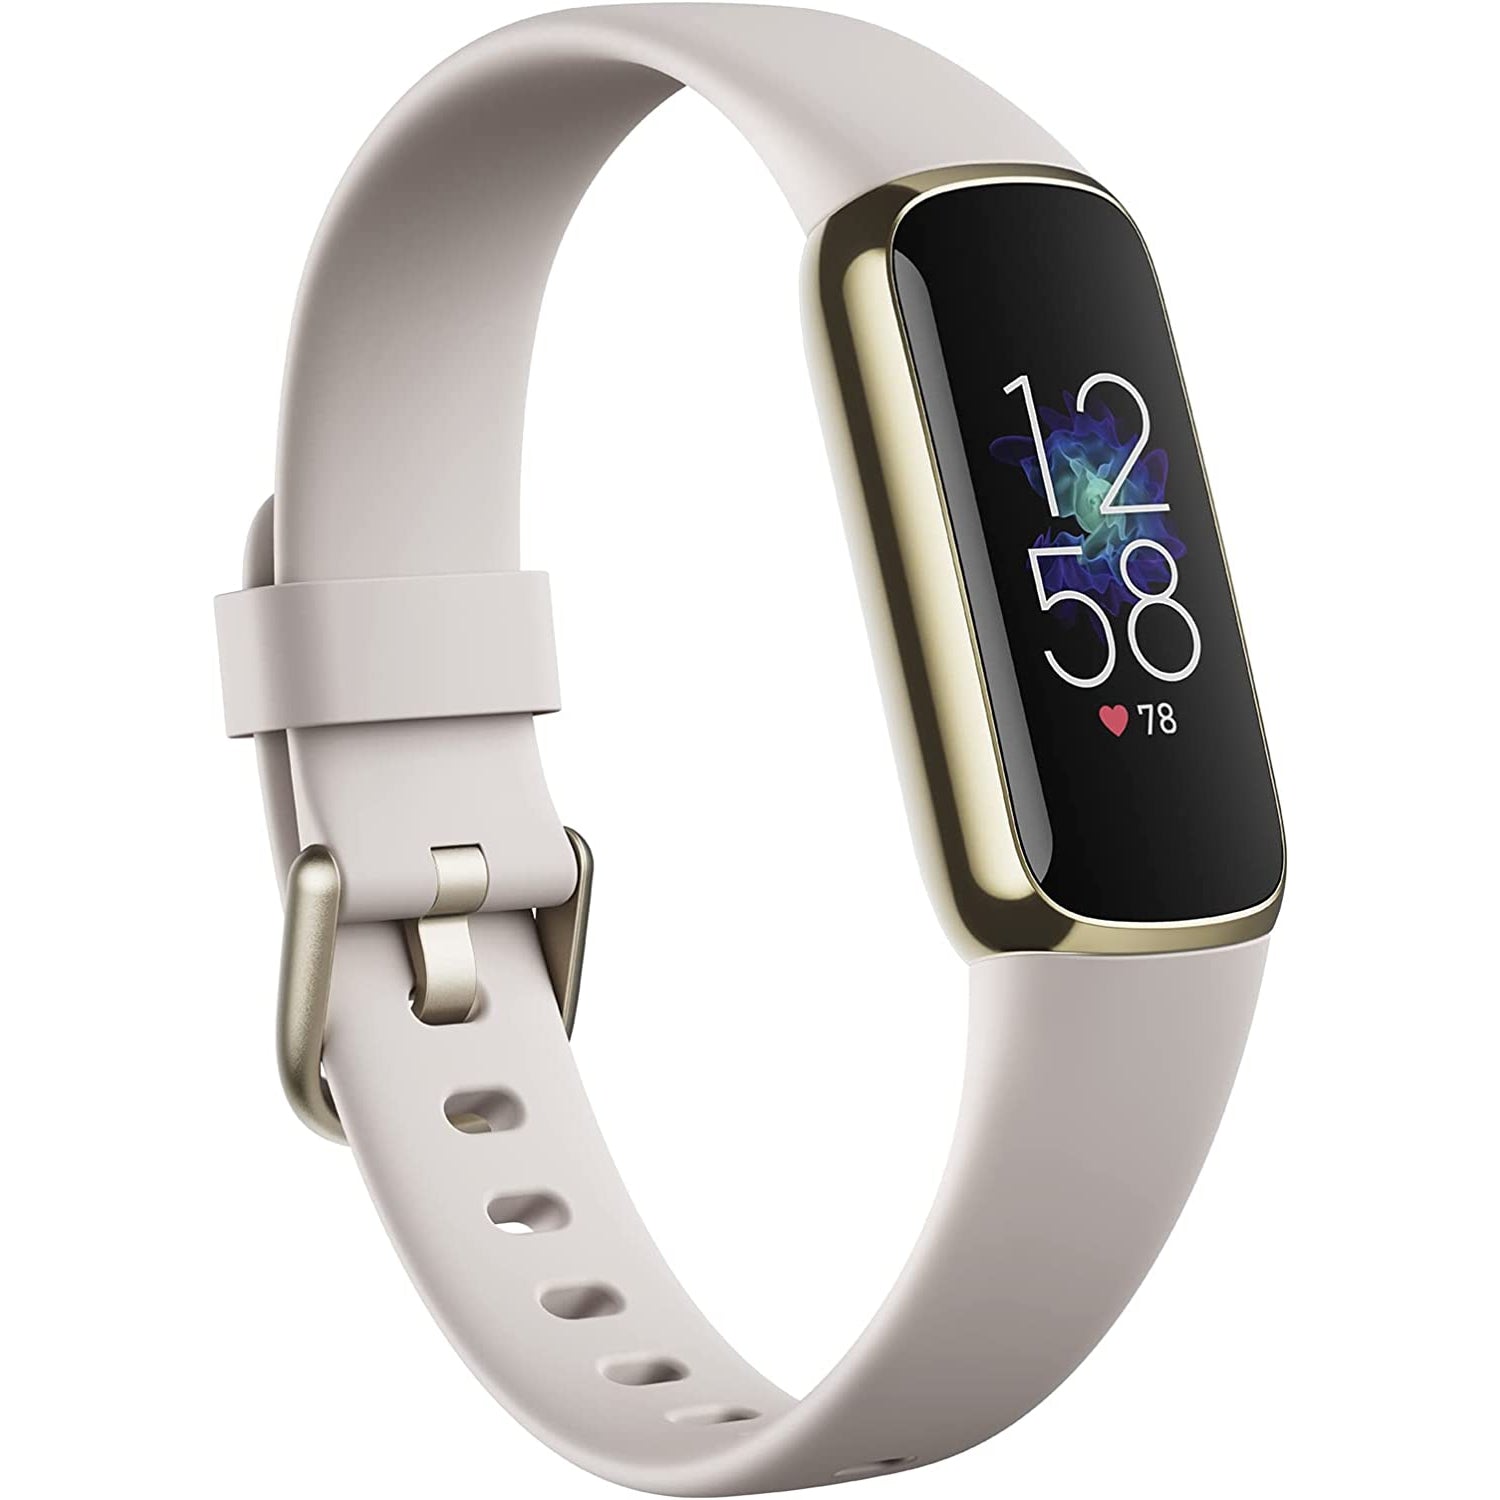 Fitbit Luxe Activity Tracker - Soft Gold / Porcelain White - Refurbished Pristine